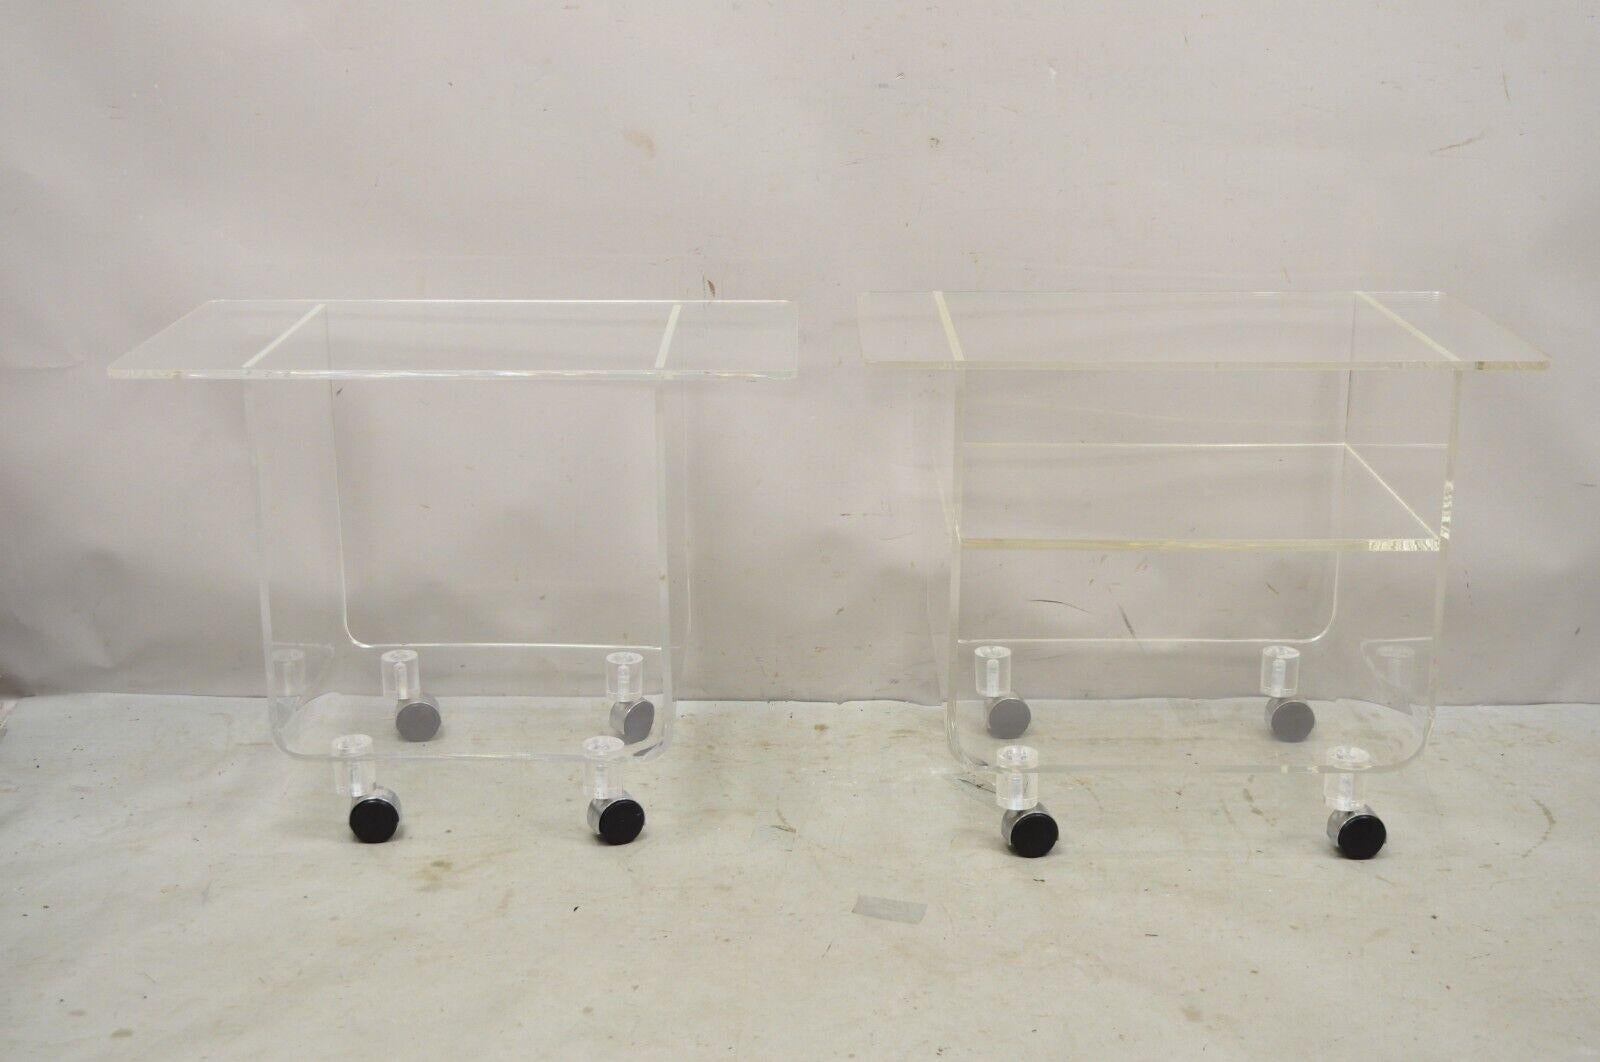 Vintage Clear Lucite Acrylic Mid Century Modern Rolling Side Tables - Complimentary Pair. Item featured is a slight variation in style and size. One table has a middle shelf while the other is open. Size between tables varies slightly. Please see